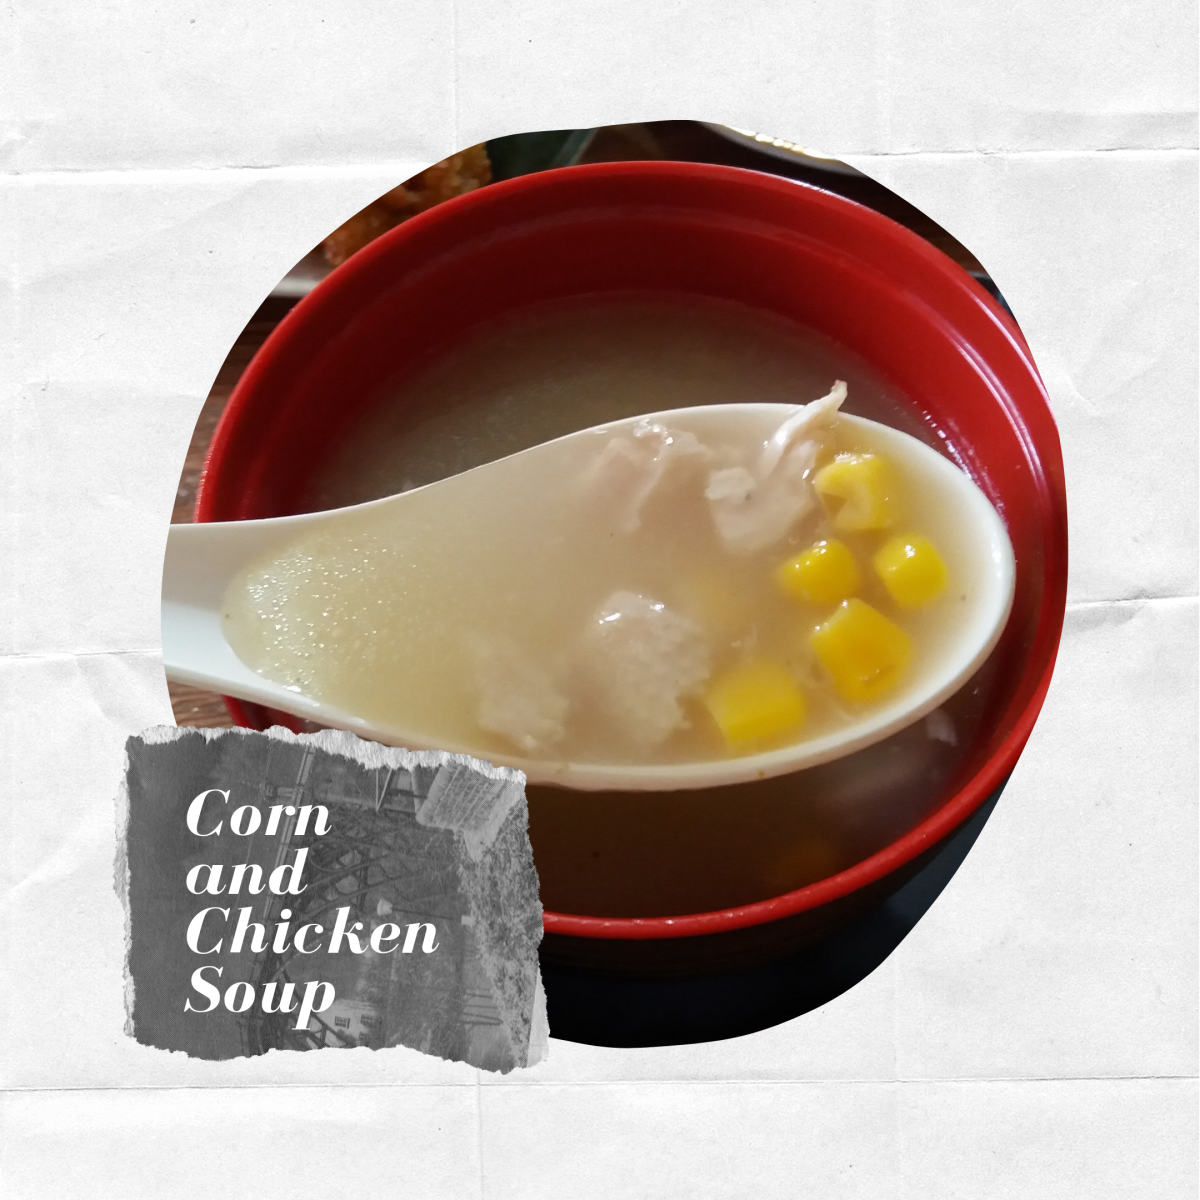 Corn and chicken soup